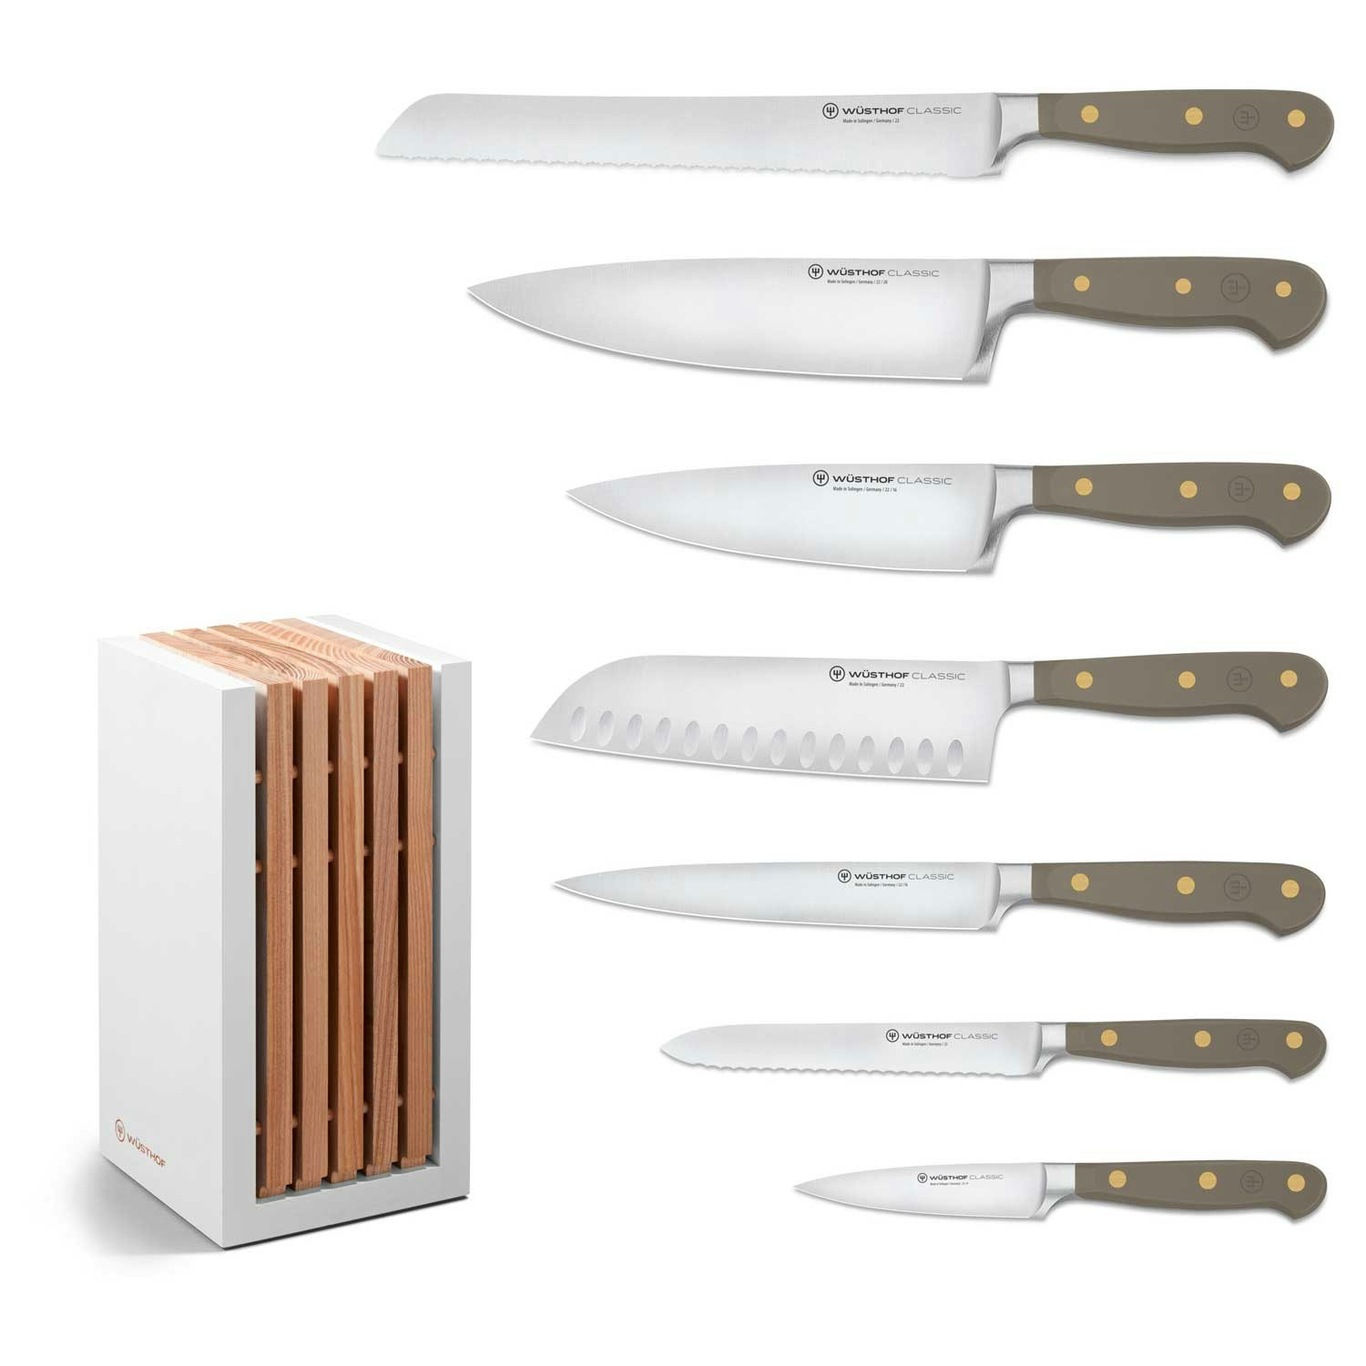 https://royaldesign.com/image/2/wusthof-classic-colour-knife-set-with-knife-block-8-pieces-0?w=800&quality=80